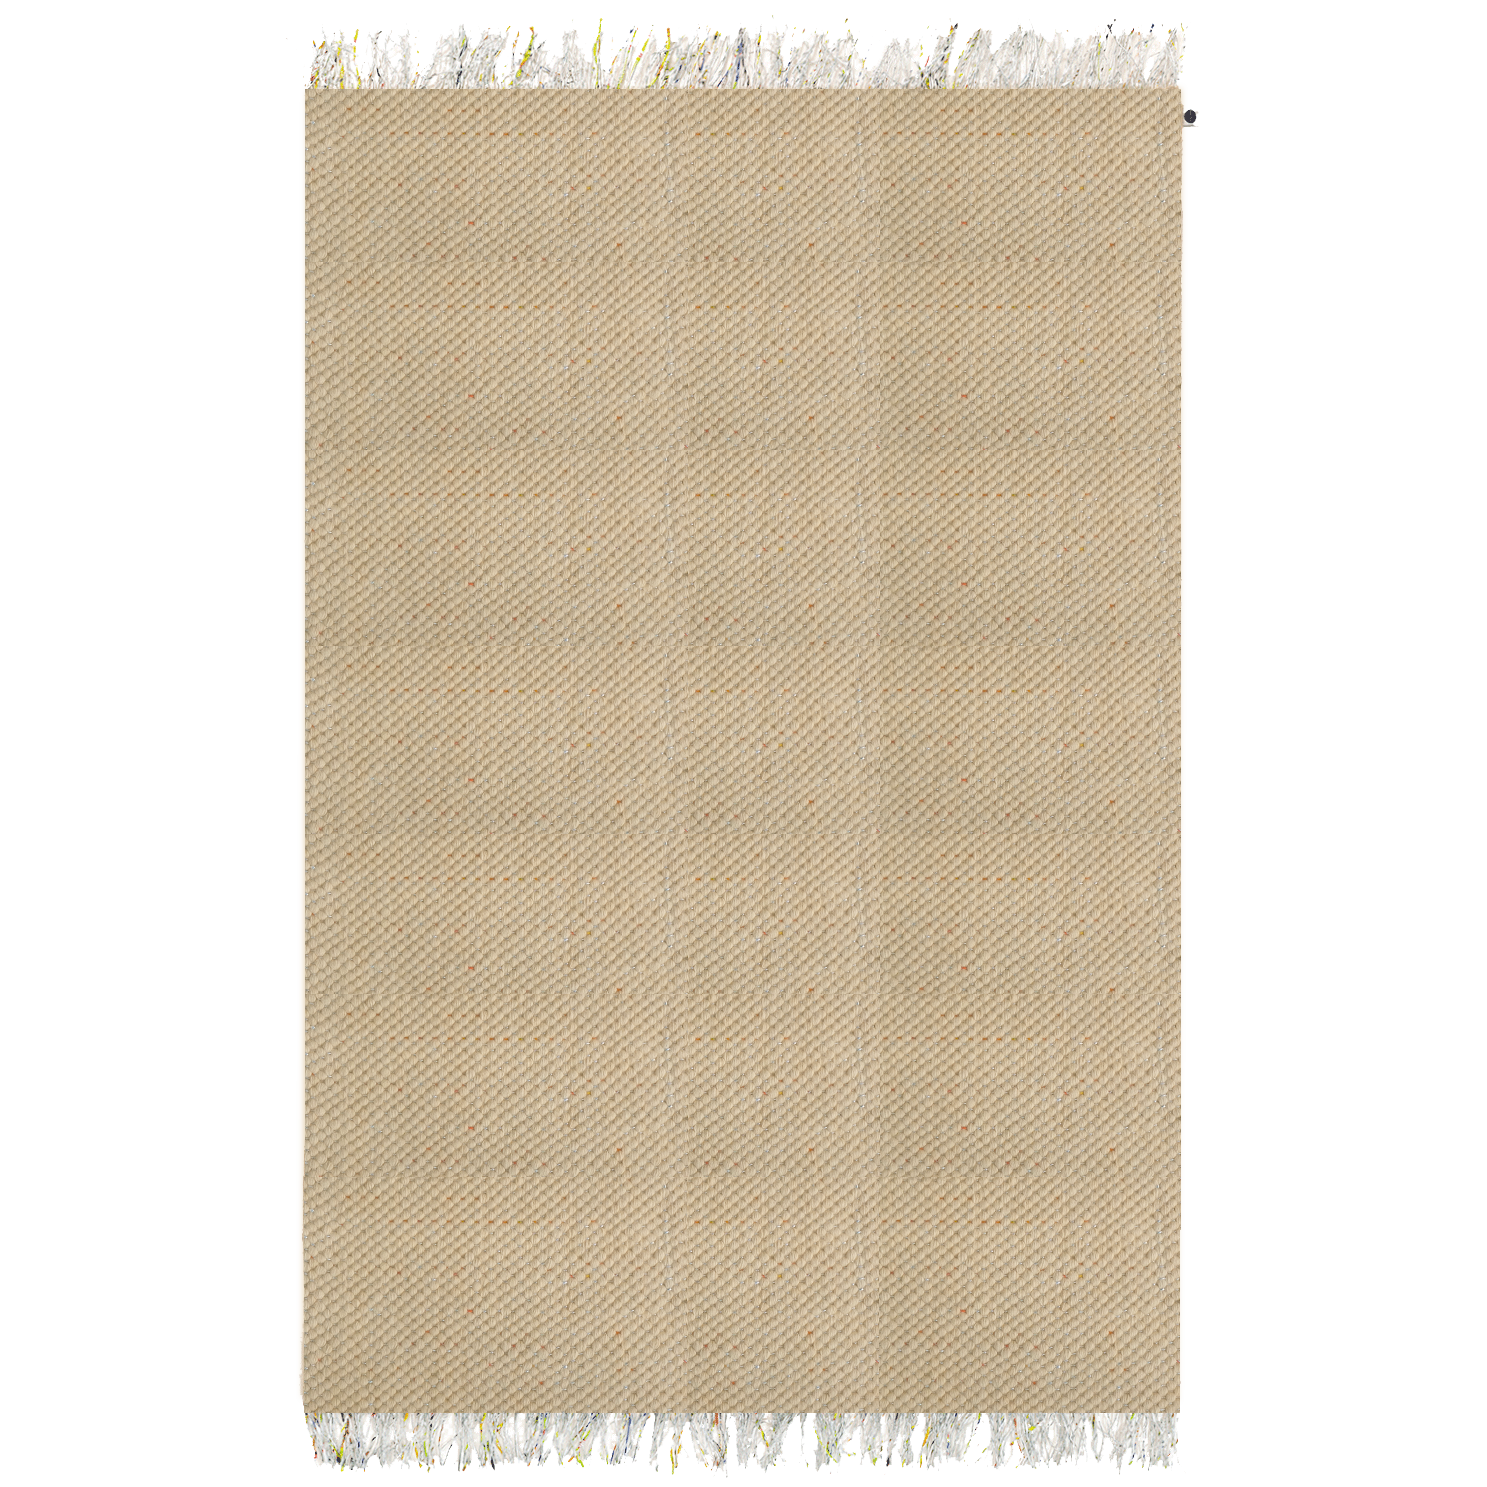 Candy Wrapper Rug_Bold_white sand